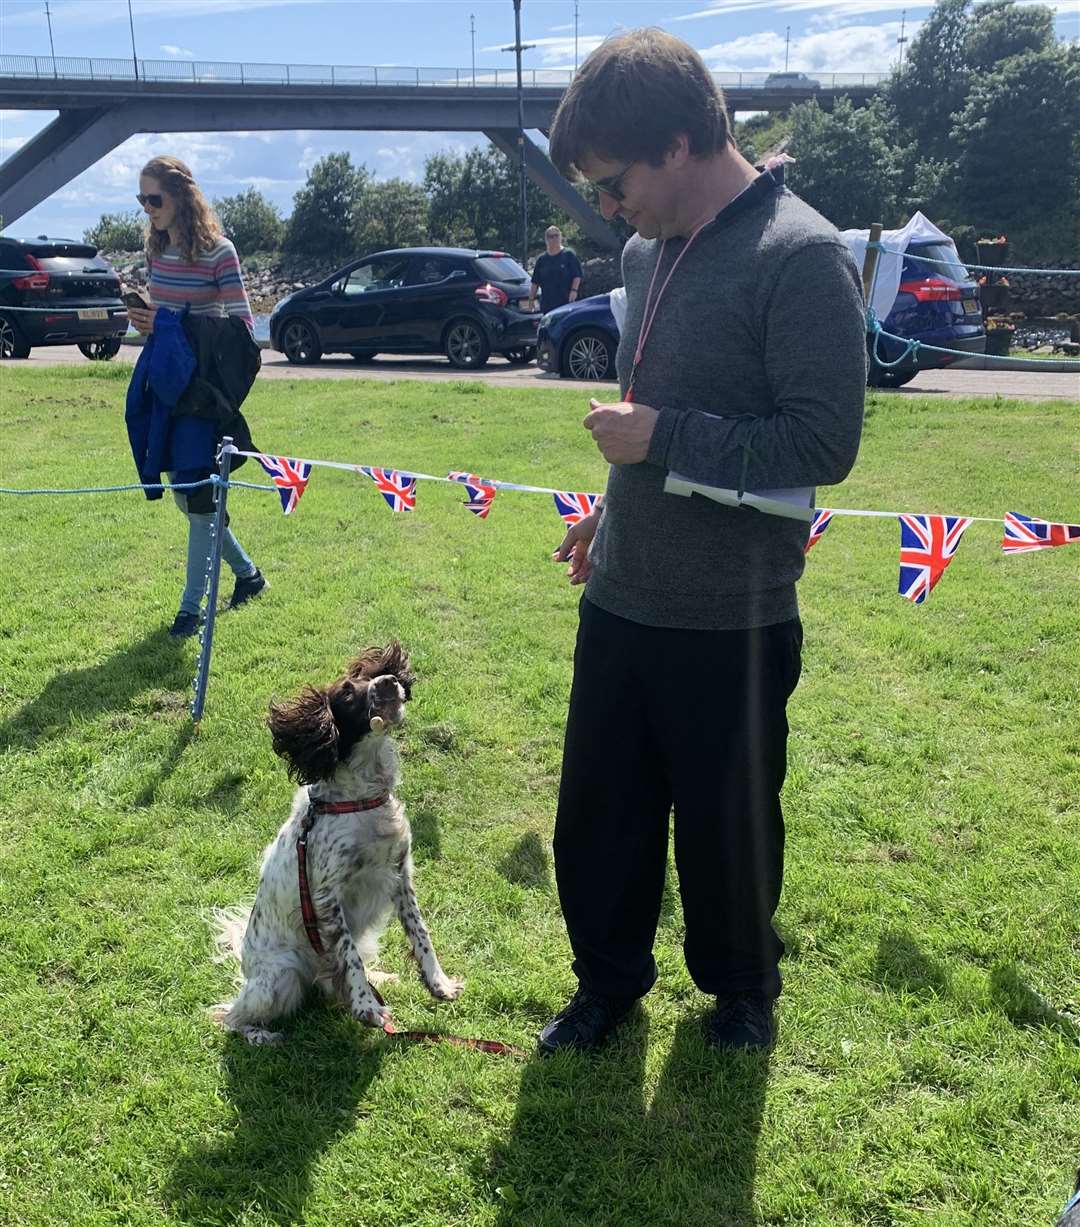 Gracie the springer spaniel demonstrating her biscuit catching skills alongside owner David Baines from Brora.